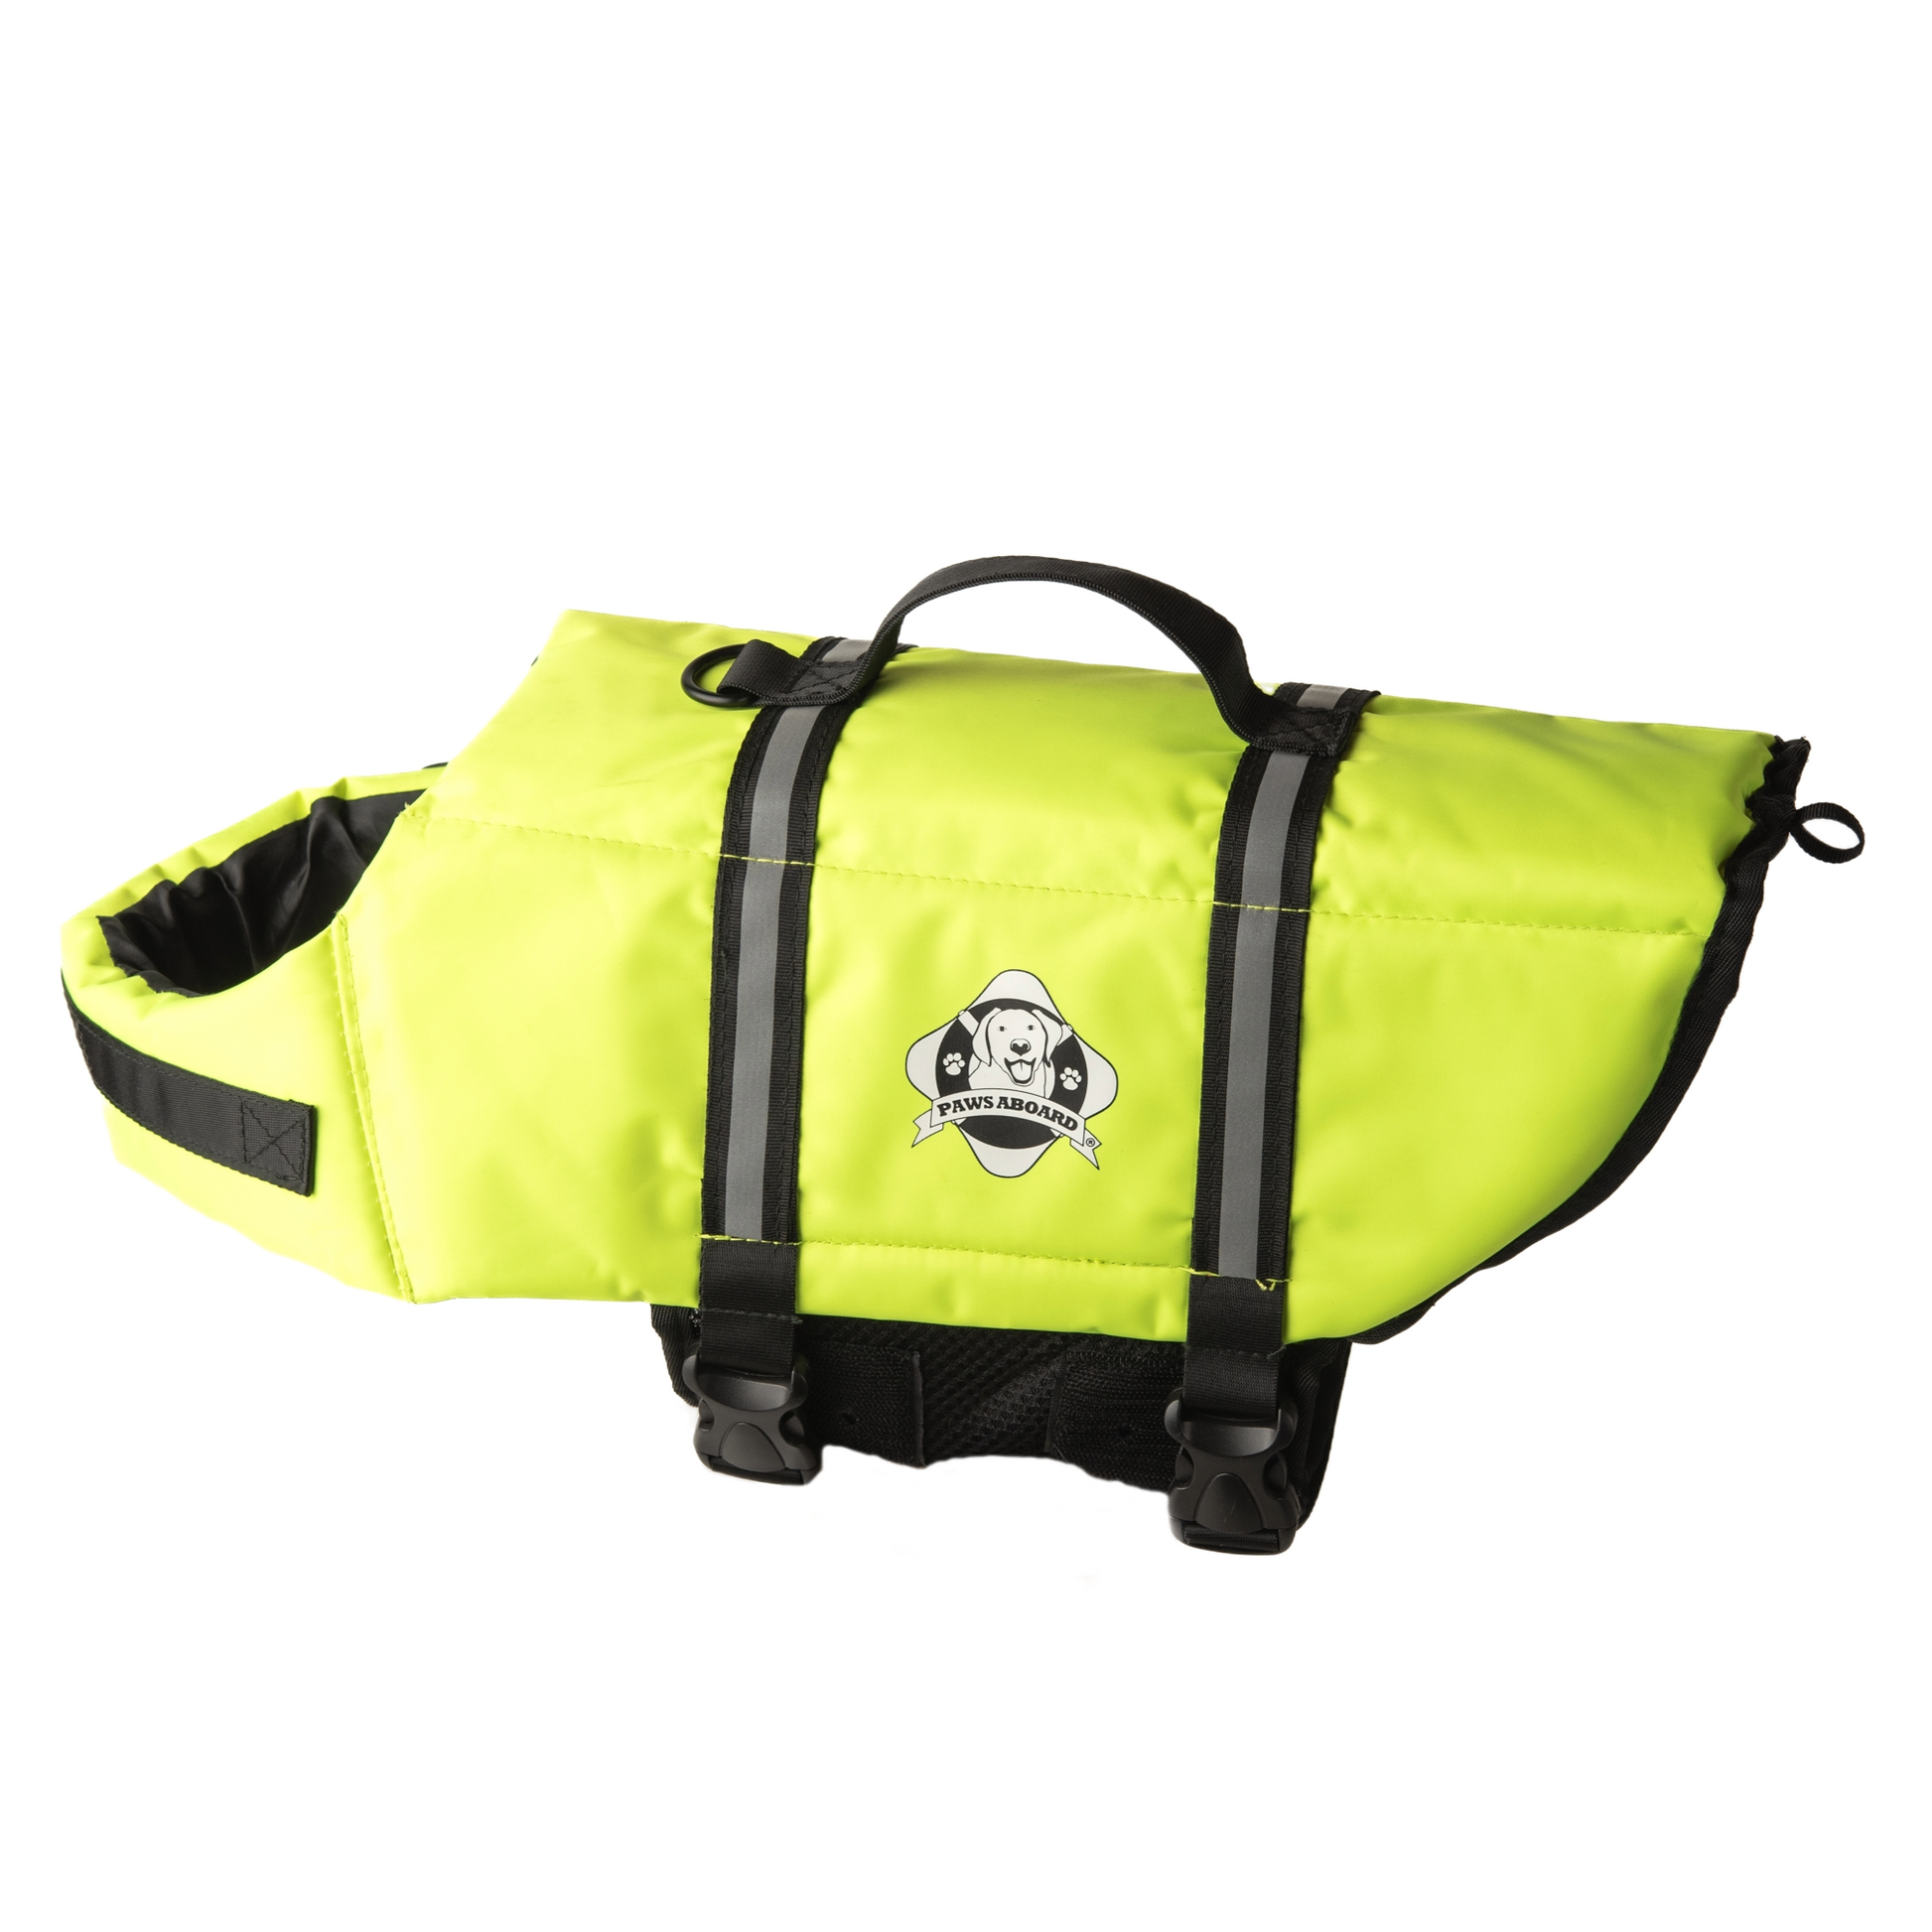 Safety yellow dog life jacket with breathable mesh underbelly, reflective straps for high visibility, leash clip, and a top handle. Featuring Paws Aboard logo of a dog with a blue life ring around neck.